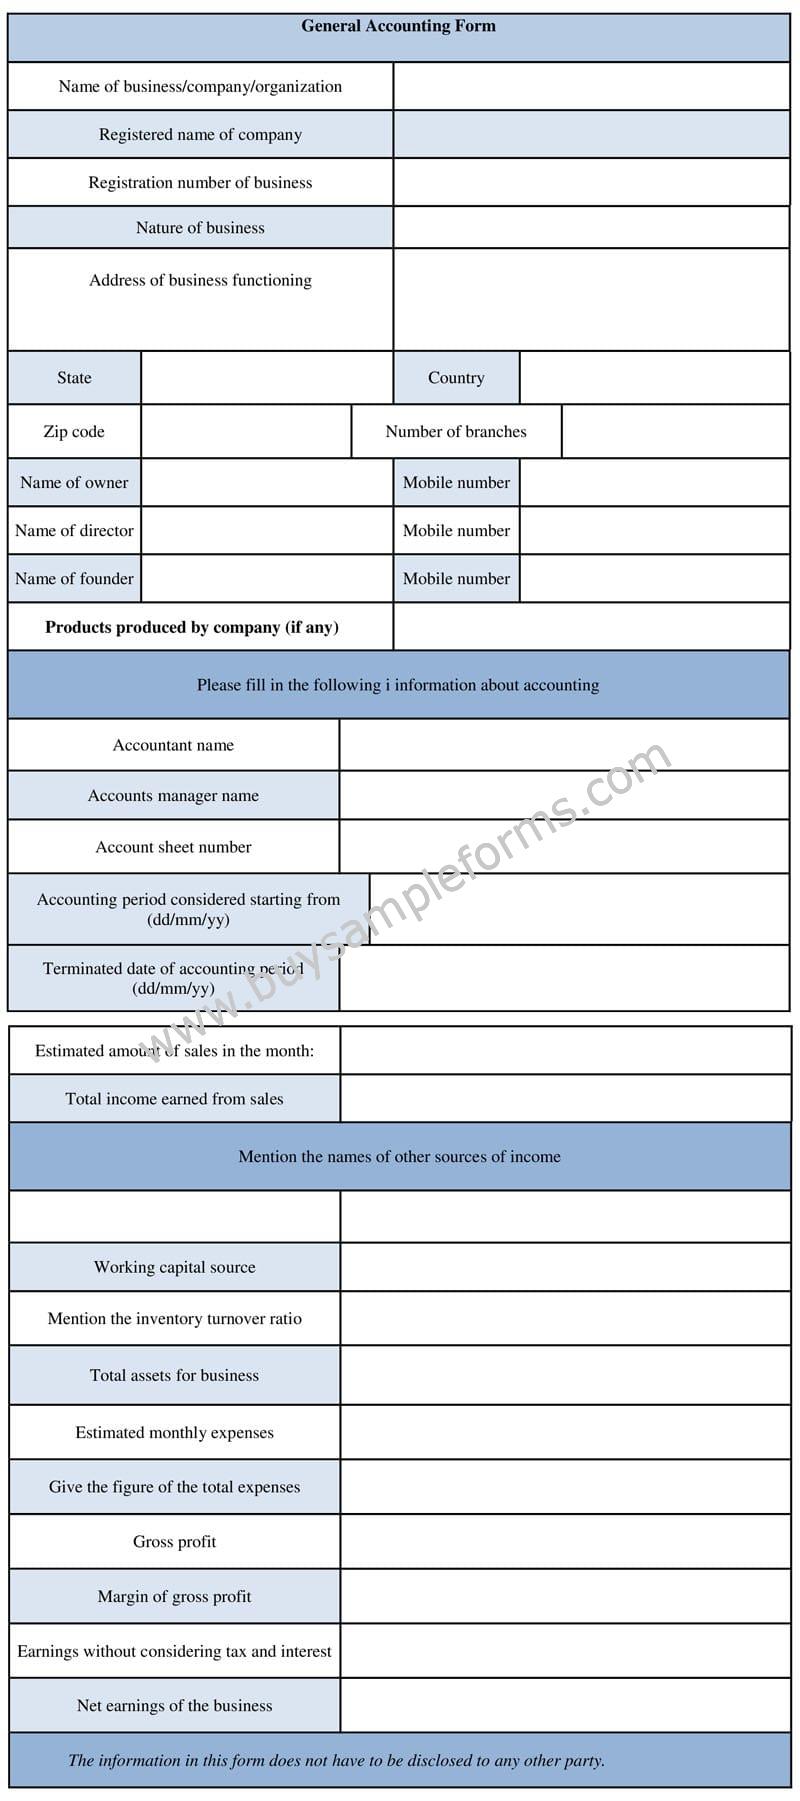 General Accounting Form, Accounting Business Form Template